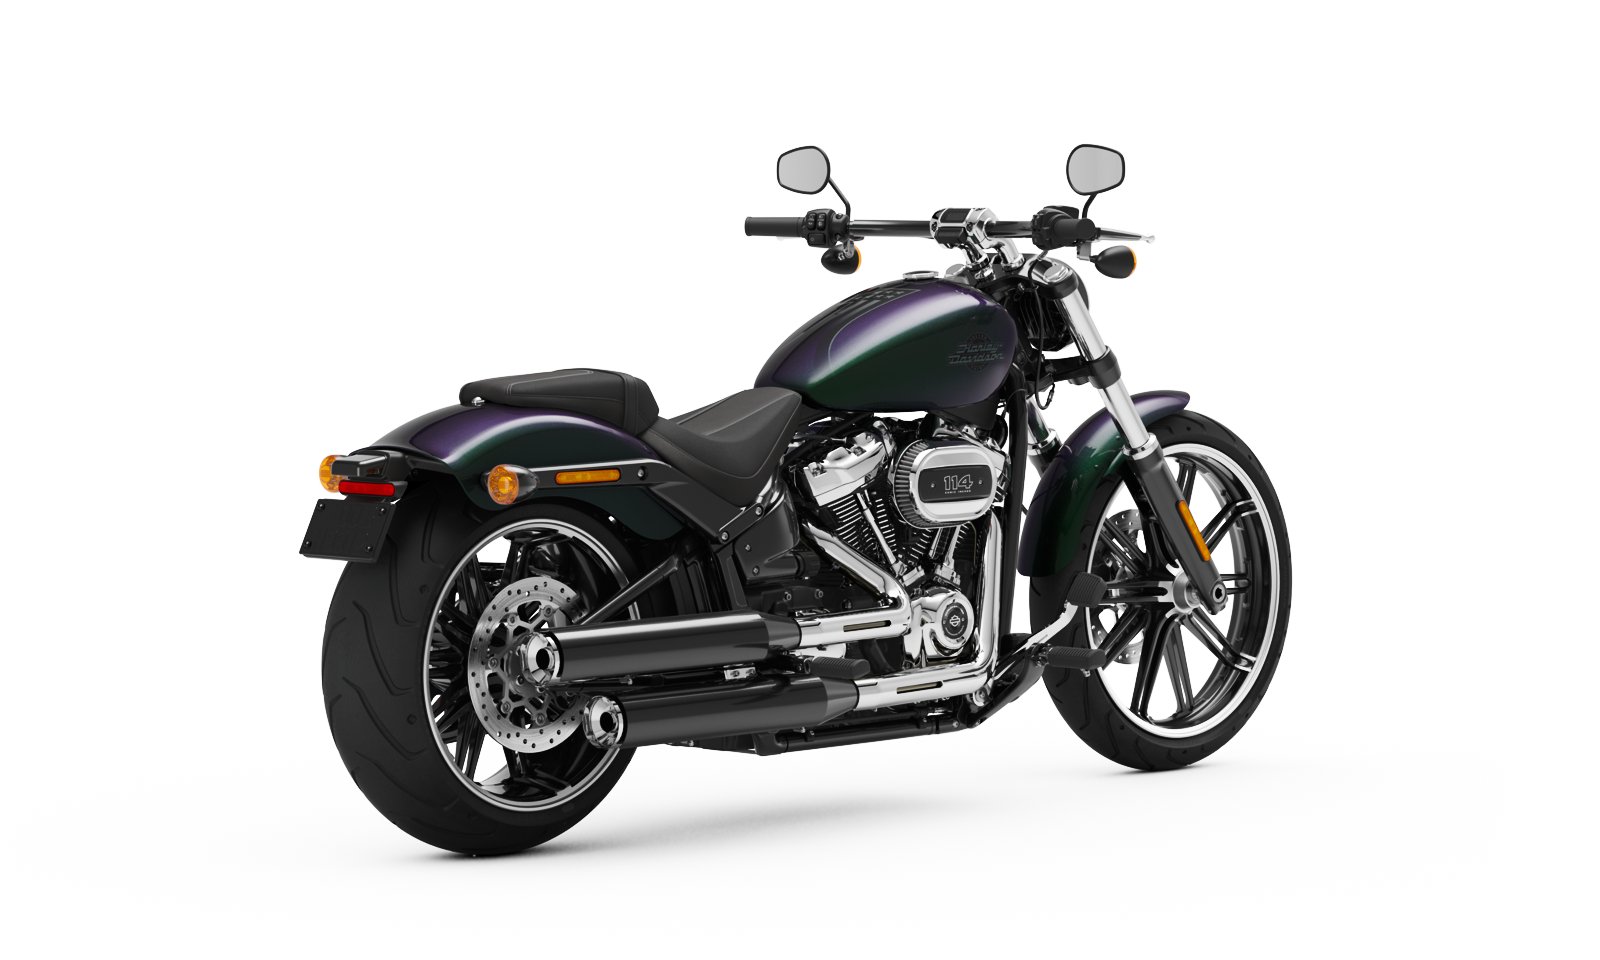 2021 Breakout Motorcycle Harley Davidson Asia Pacific Markets